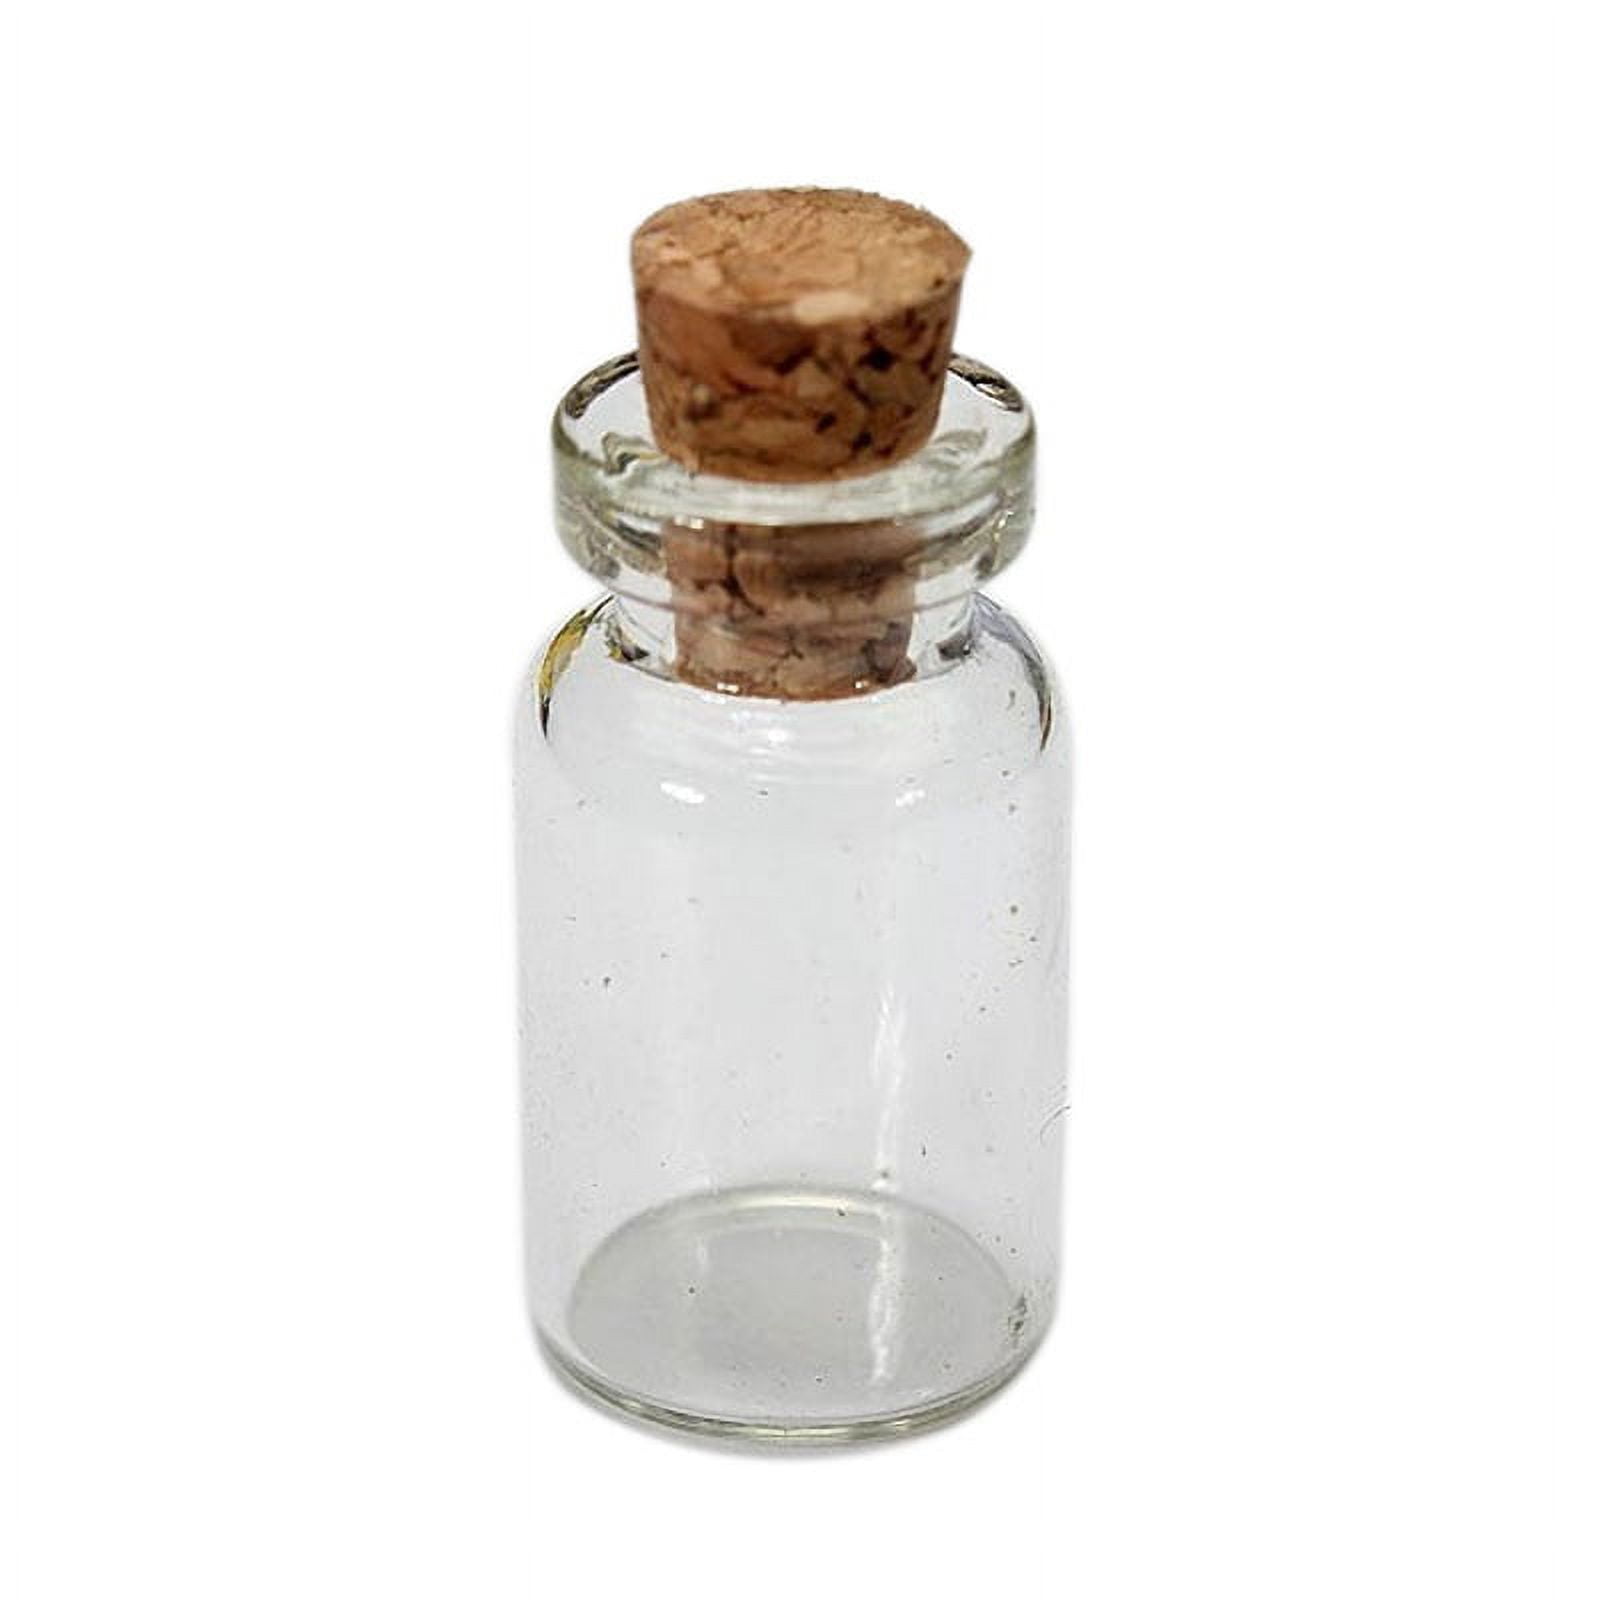 LOVIVER 10Pcs Small Glass Bottles with Cork Stopper Tiny Clear